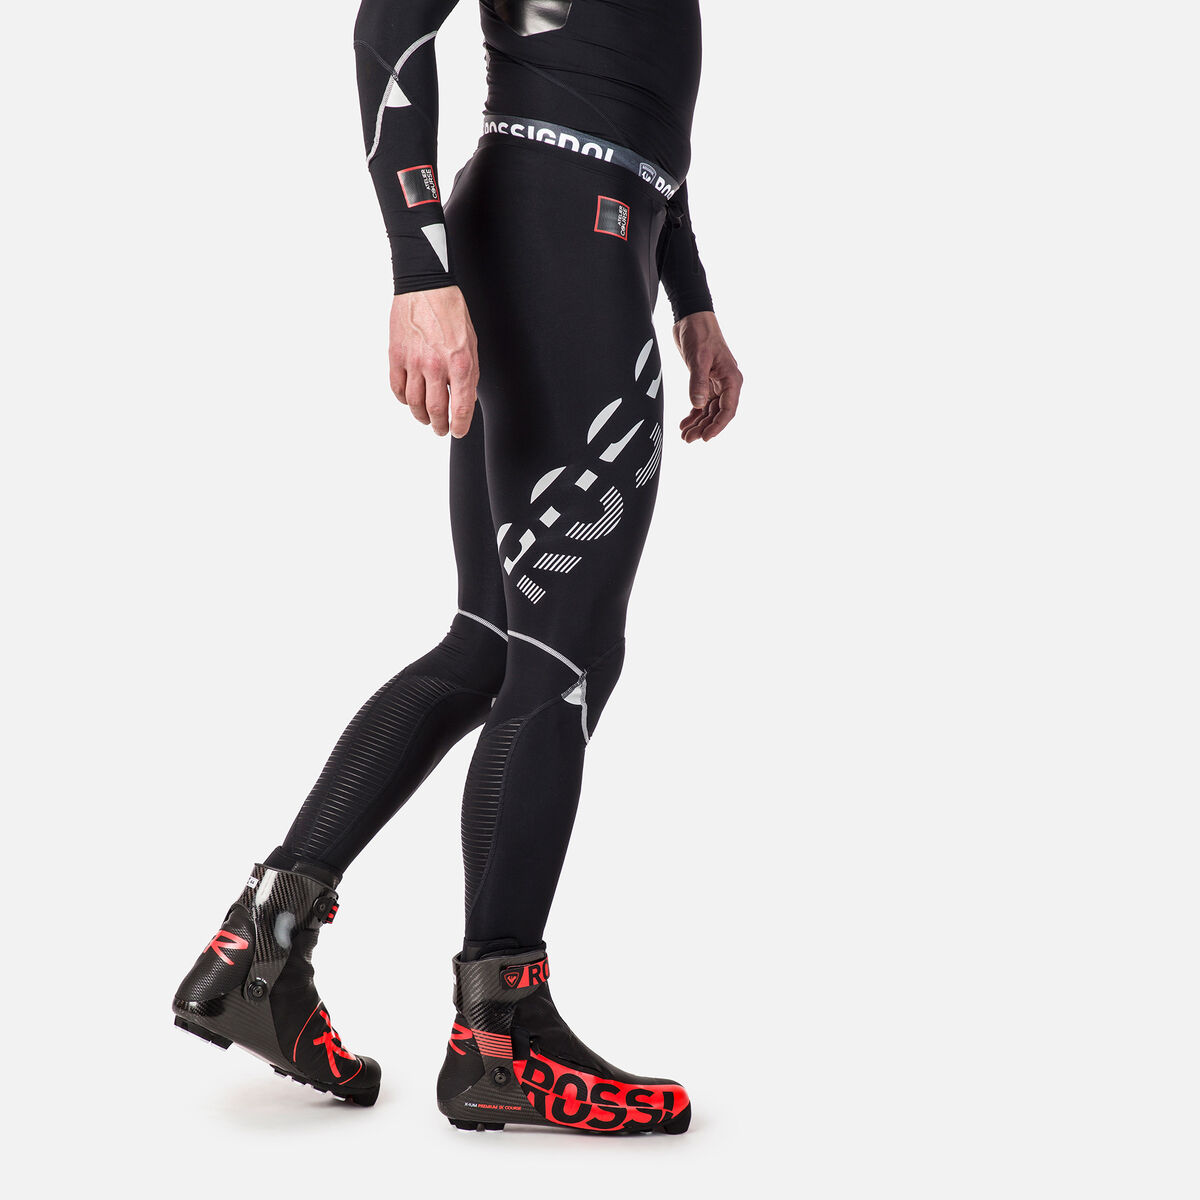 Rossignol Infini Compression Race Tights Carbon Black Women's base layer  bottoms/thermal leggings : Snowleader